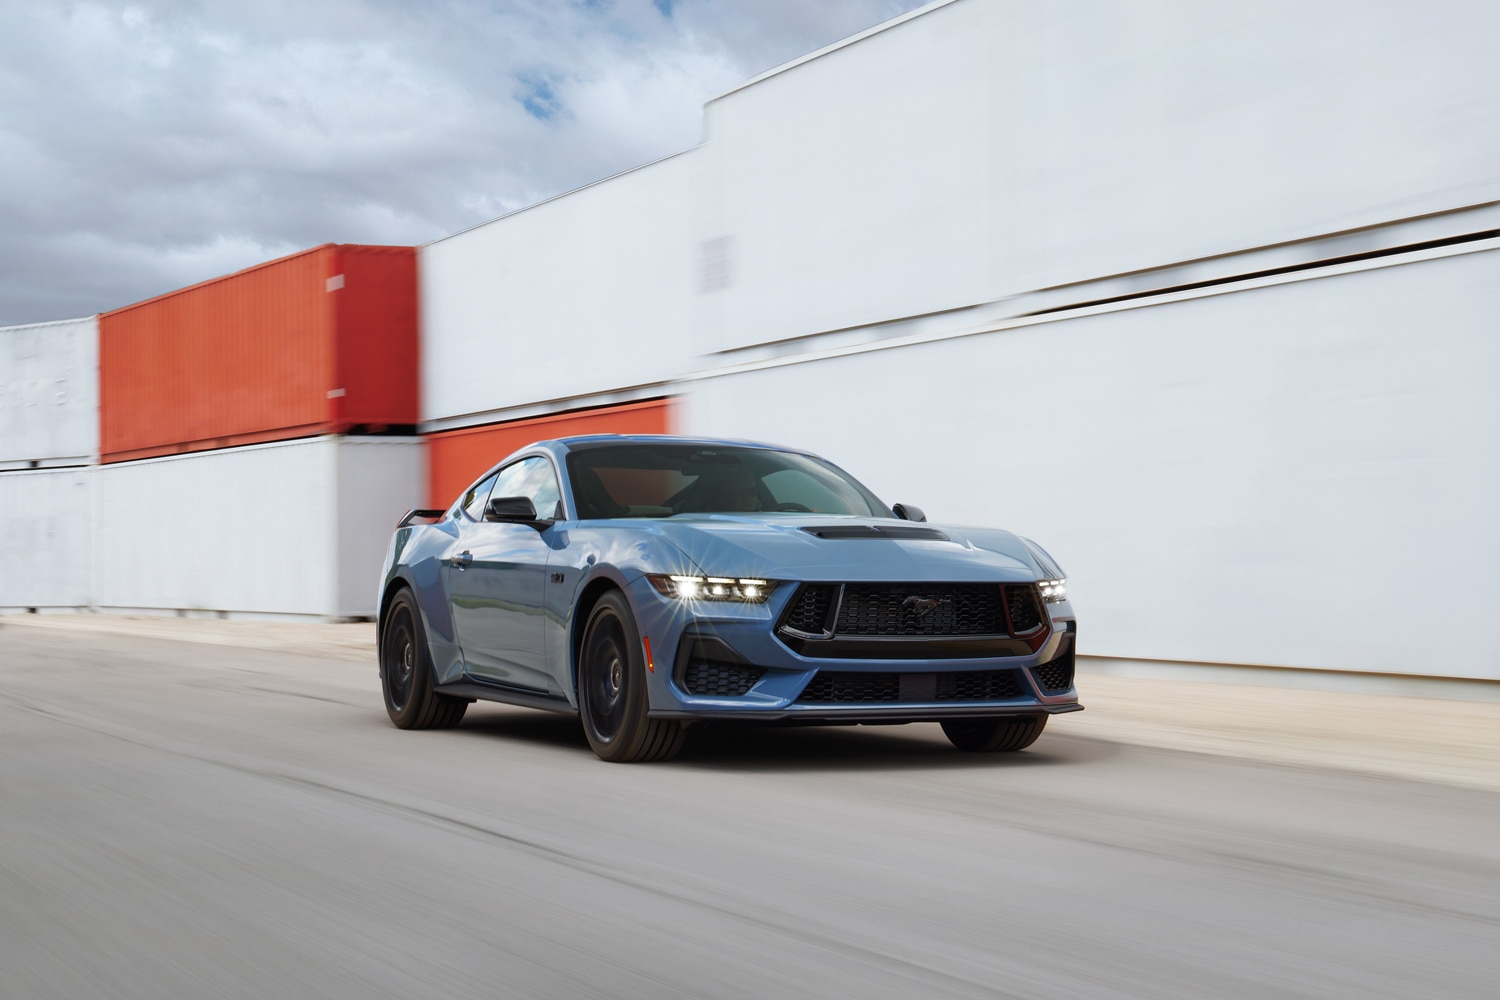 Front three-quarter view of a blue Ford Mustang